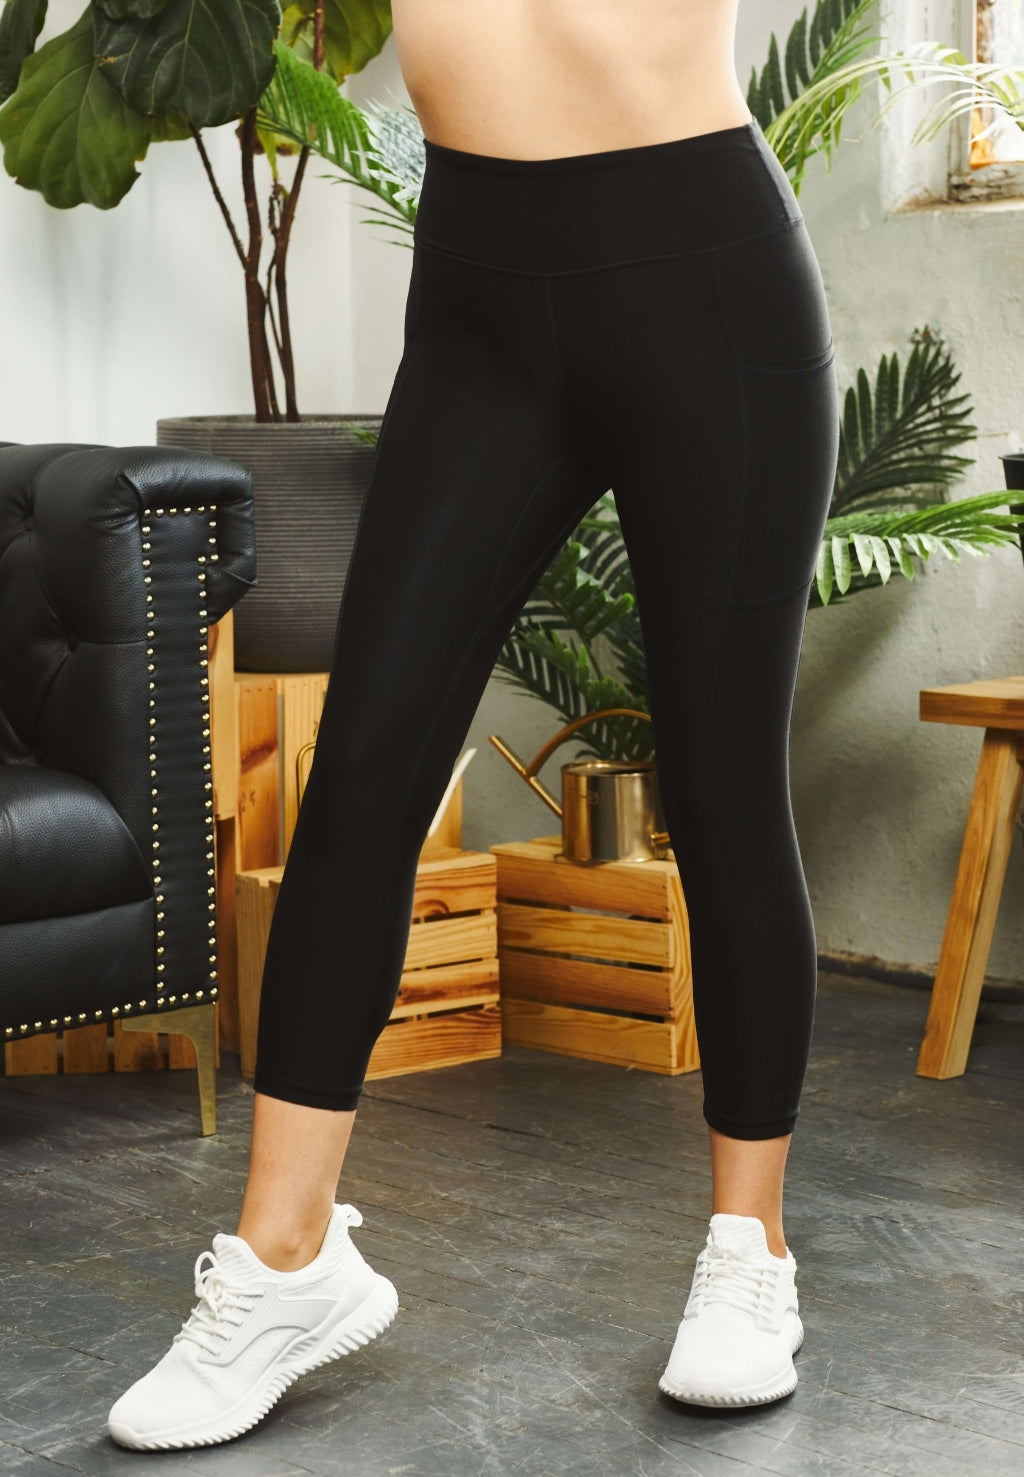 Booty Boost® Perfect Pocket Active 7/8 Leggings – Spanx